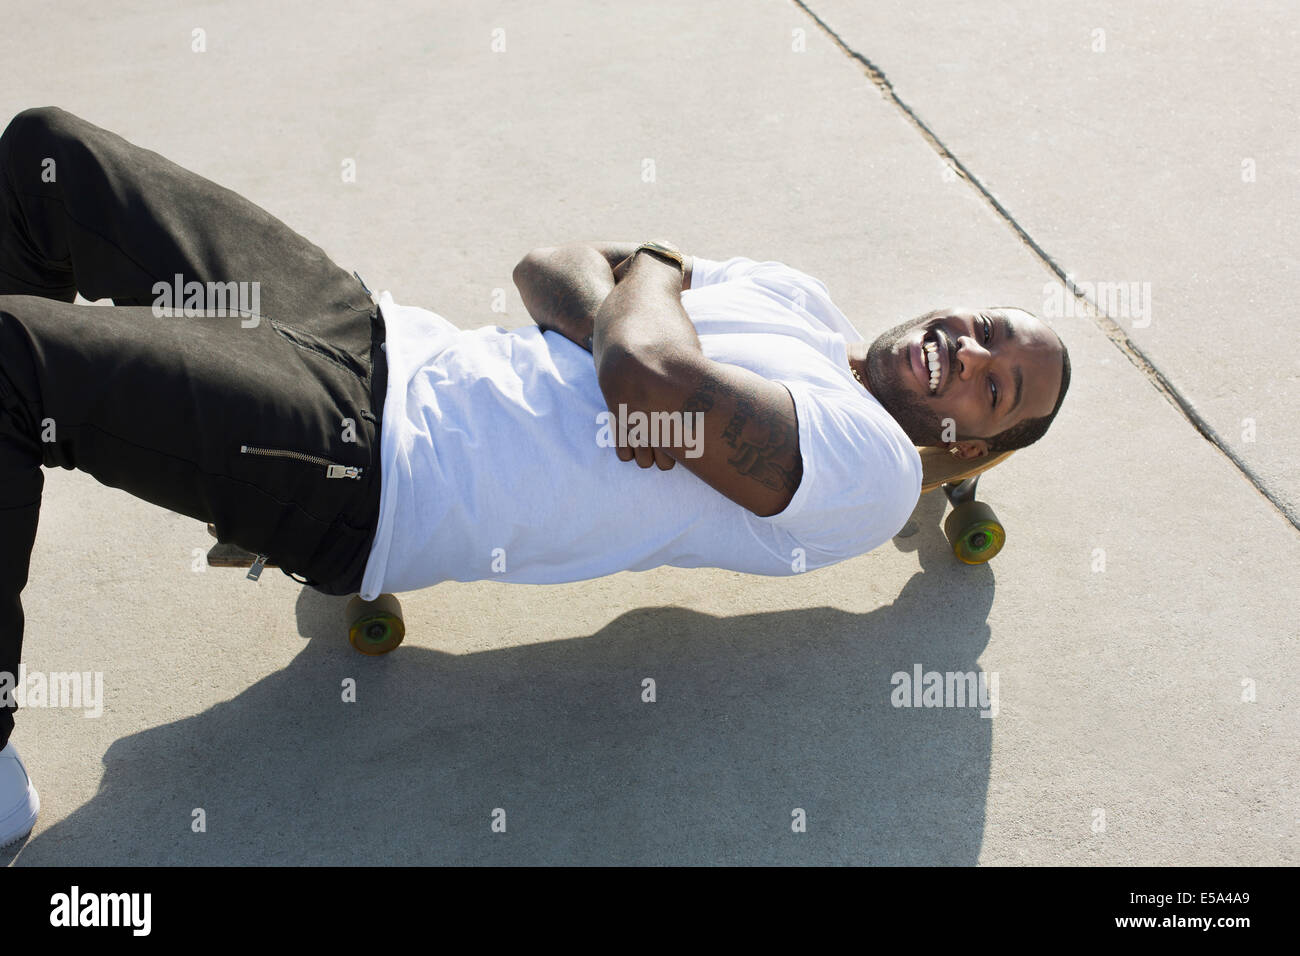 African American man laying on skateboard on city street Stock Photo